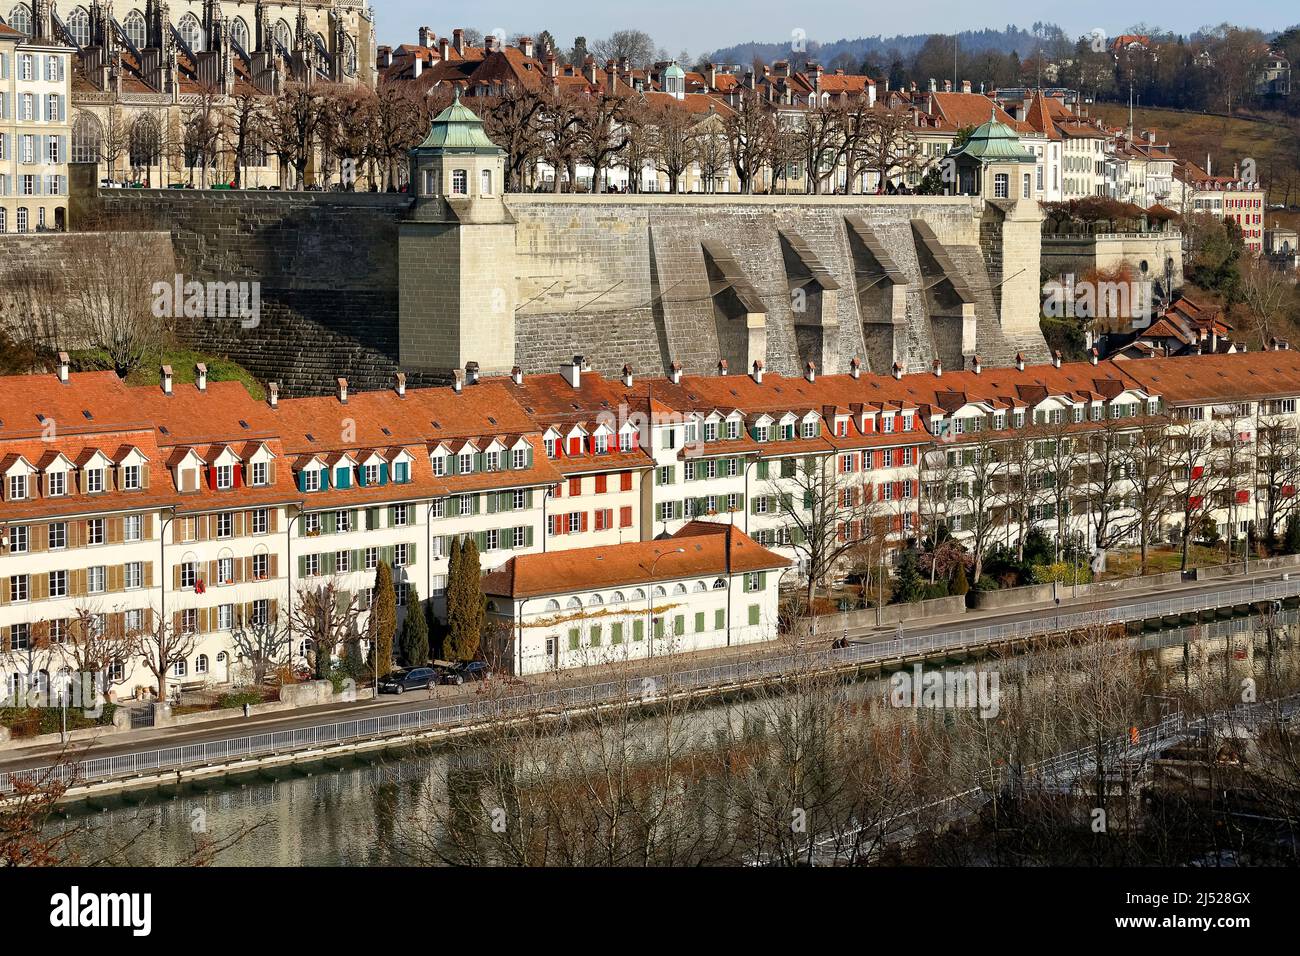 Bern, Switzerland - December 22, 2015: Muenster platform is a rectangular square, surrounded by balustrades made of sandstone and there are corner pav Stock Photo